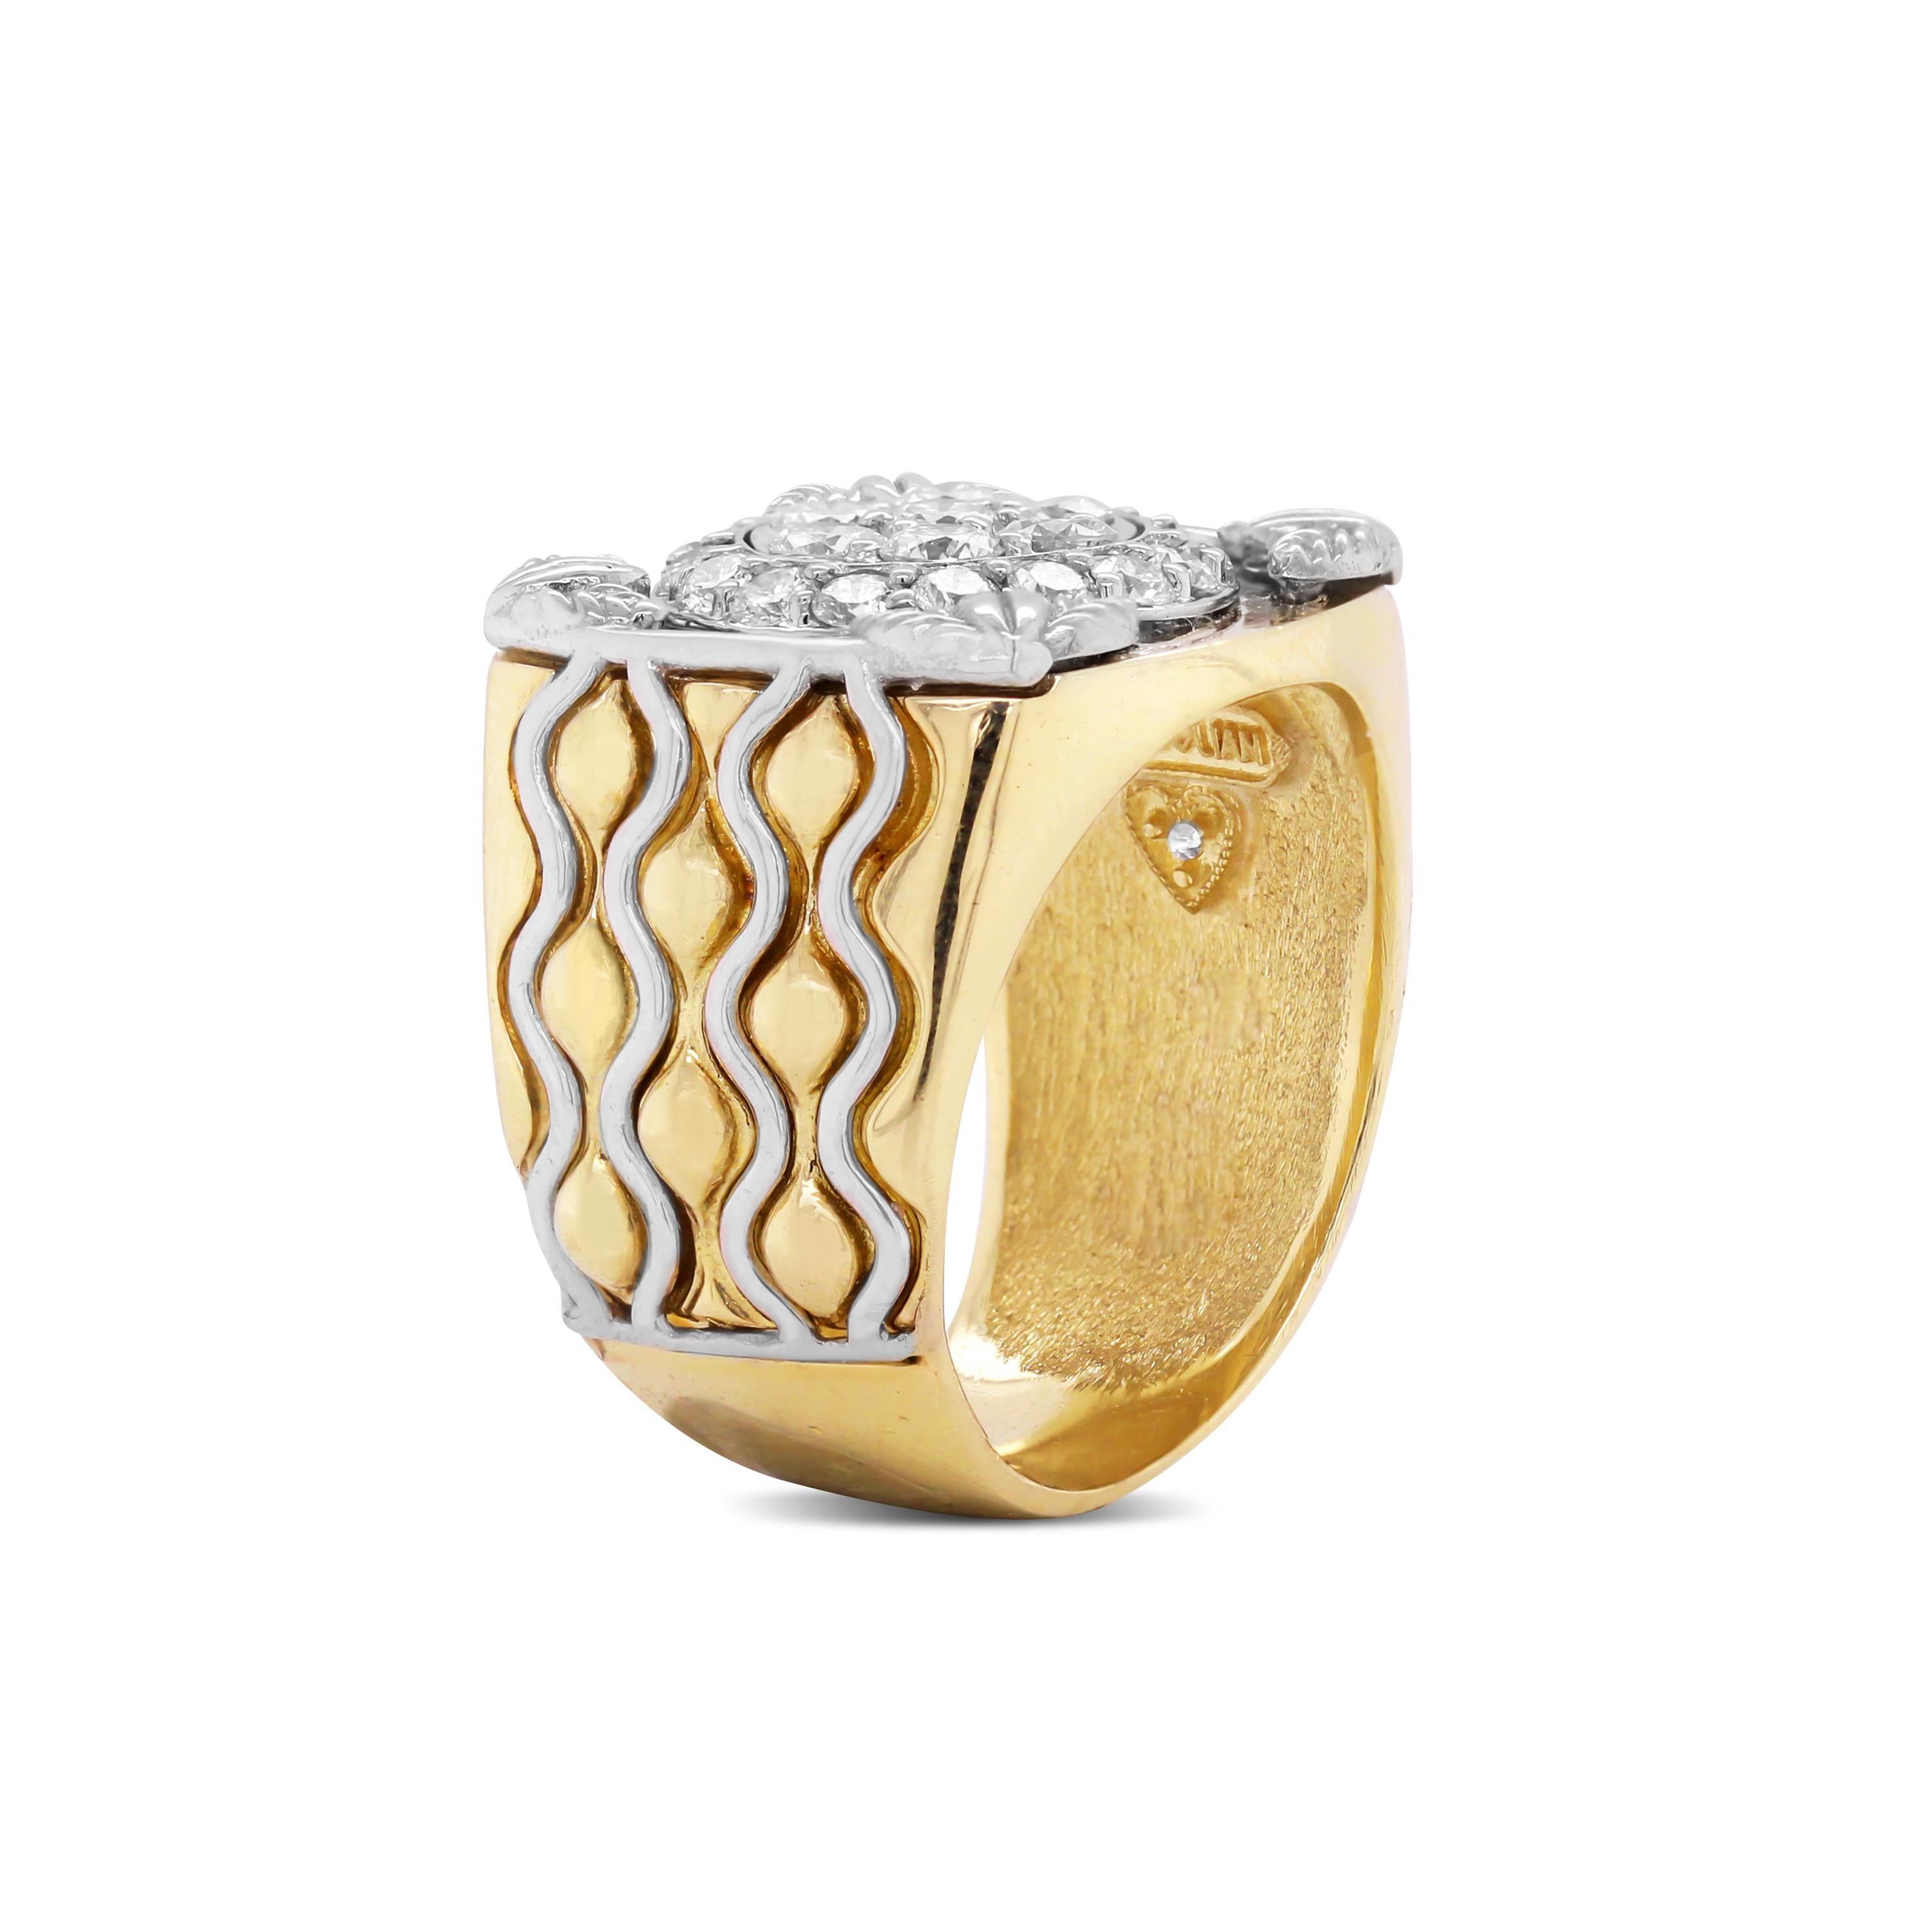 18K Yellow and White Two-Tone Gold and Diamond Mens Ring by Stambolian

This one-of-a-kind ring features a high polished finished, mirror finish on the face of the ring. Both sides of the band are done in a very unique, textured like finish leading